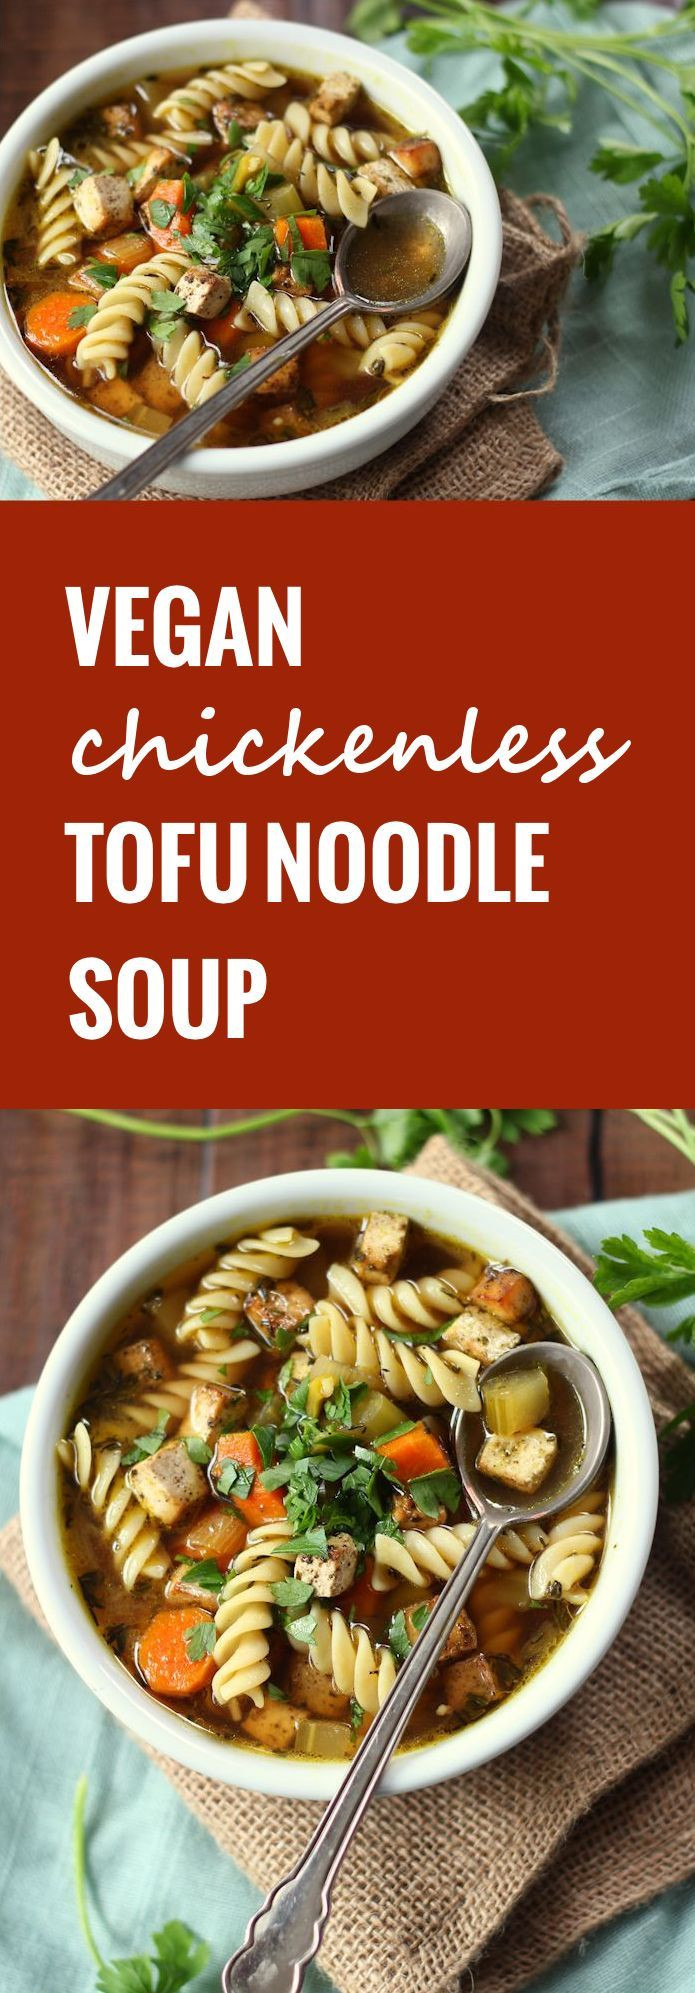 Tofu Chicken Noodle Soup
 This tofu noodle soup features savory baked tofu lots of